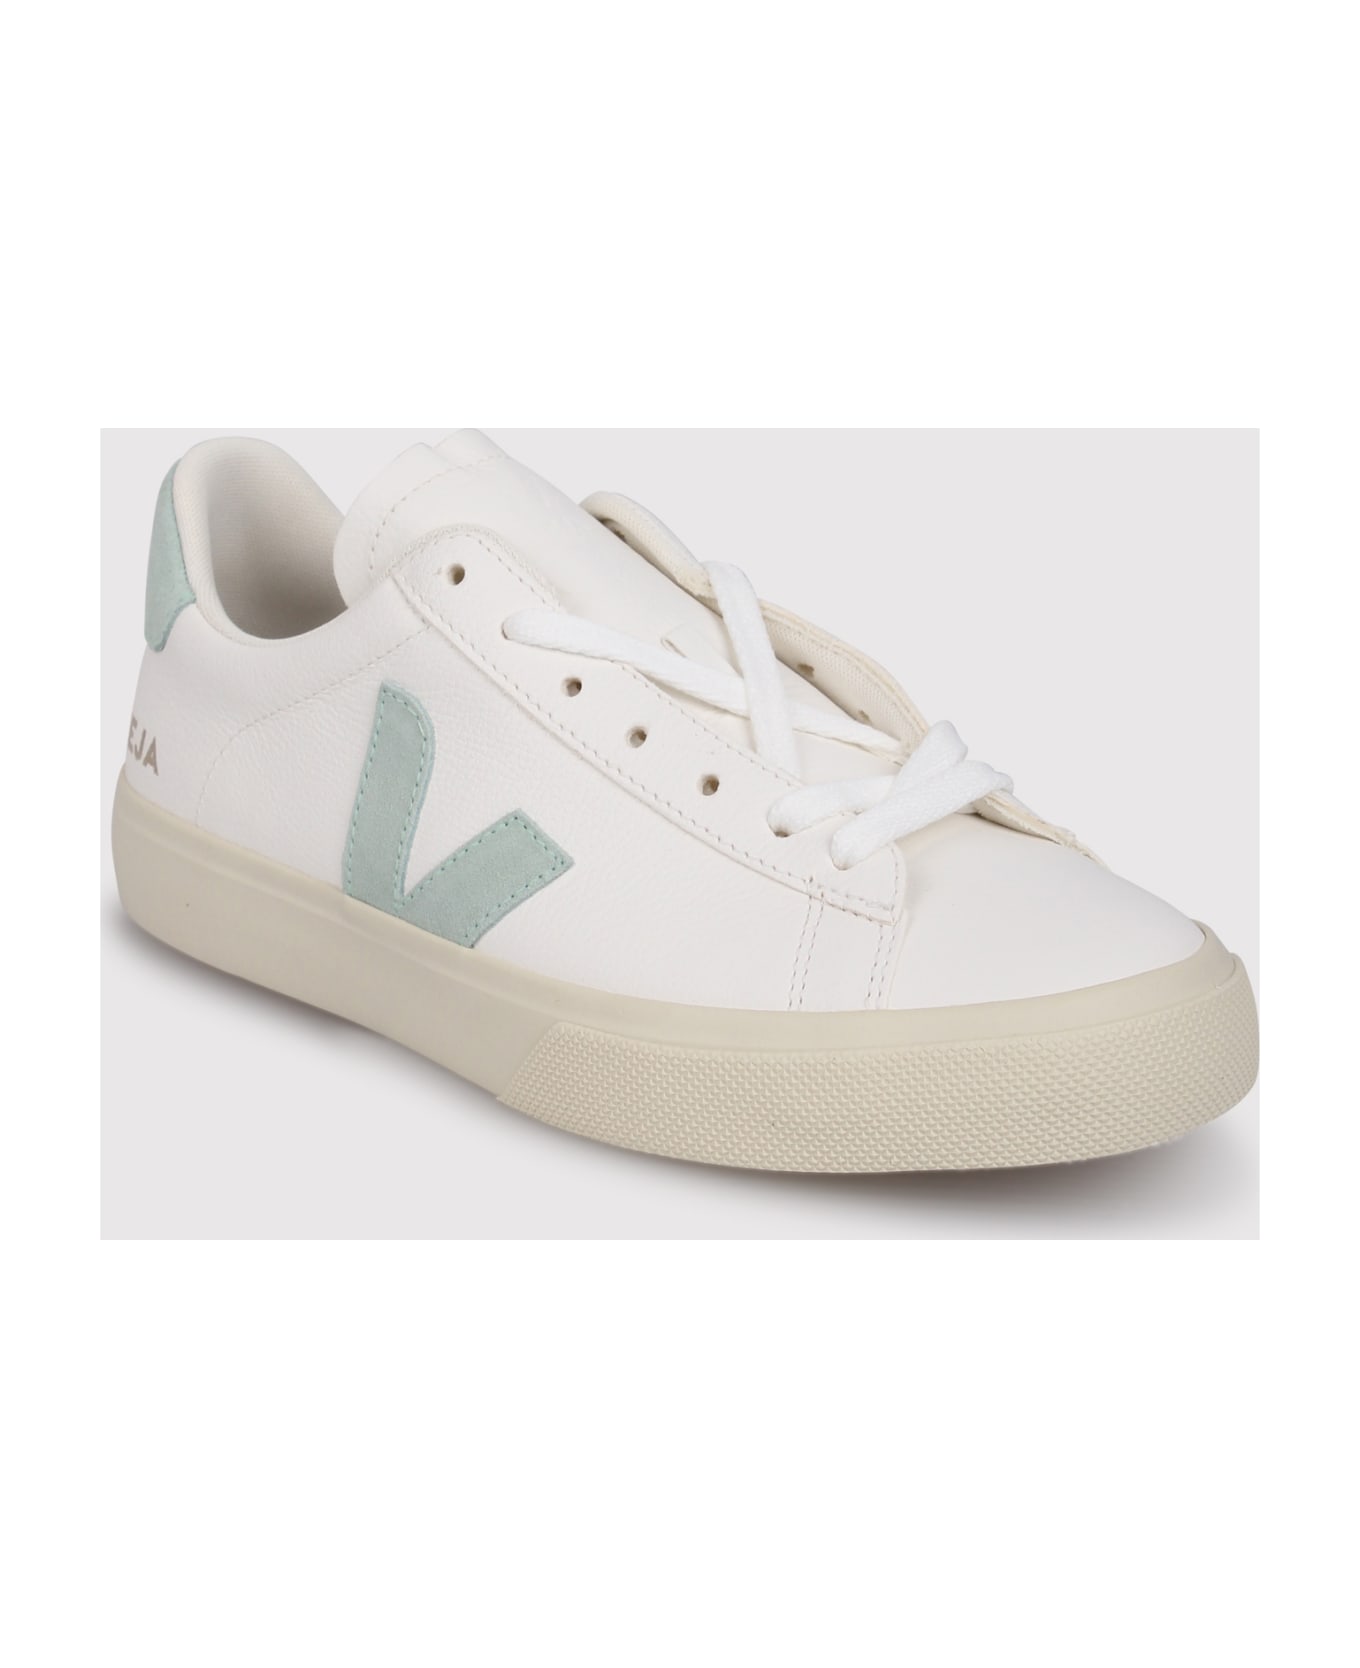 Veja Campo Sneakers スニーカー